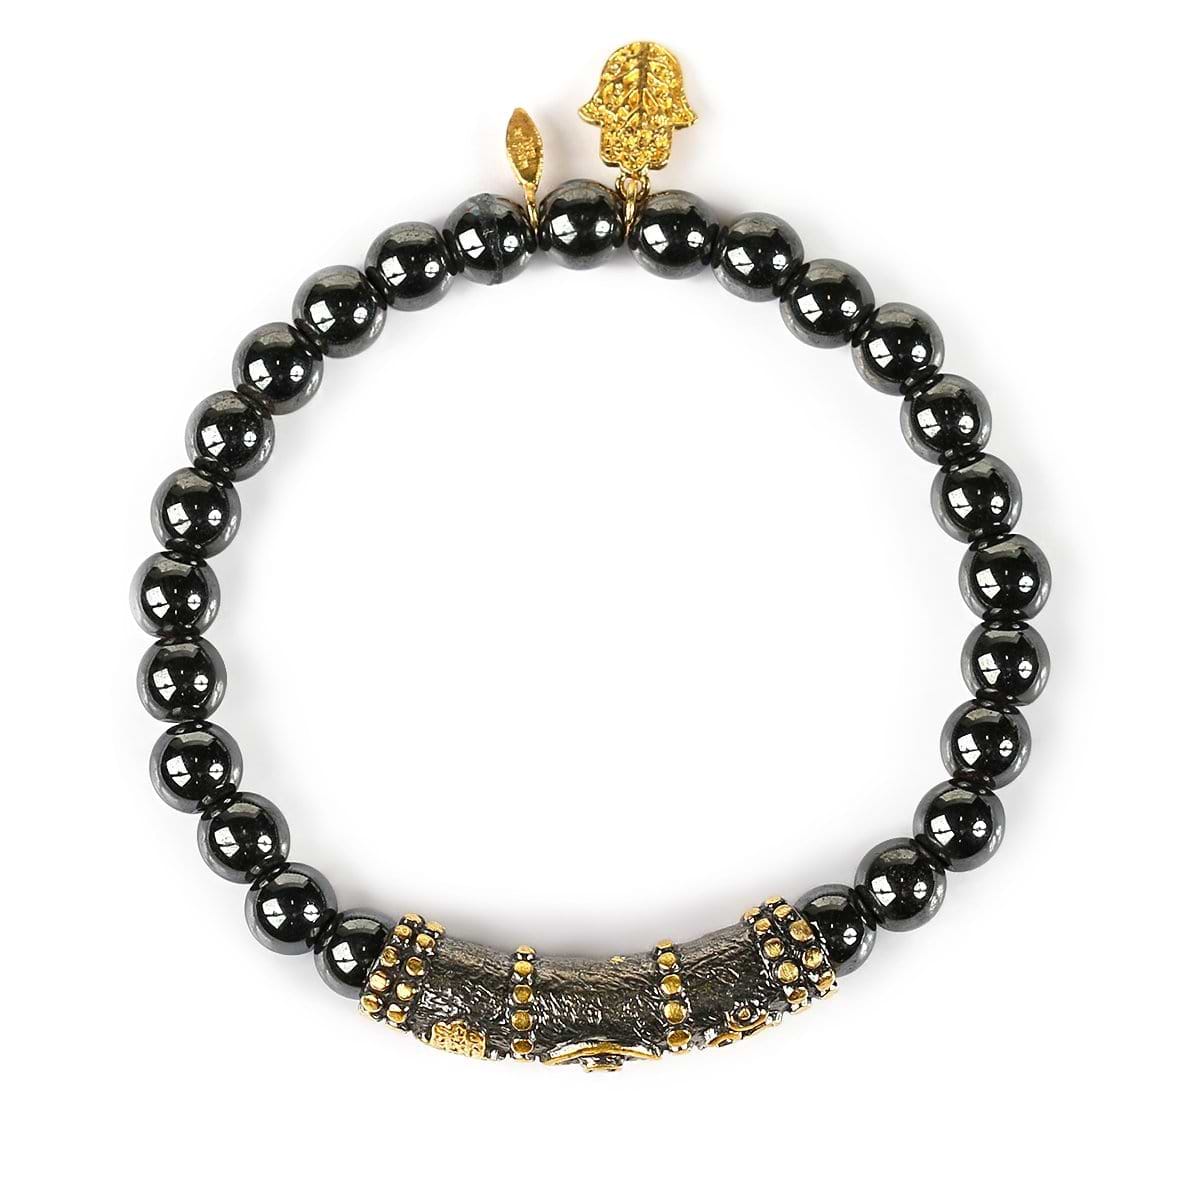 Karma and Luck  Bracelet  -  Thought Stabilizer Triple Protection Bracelet